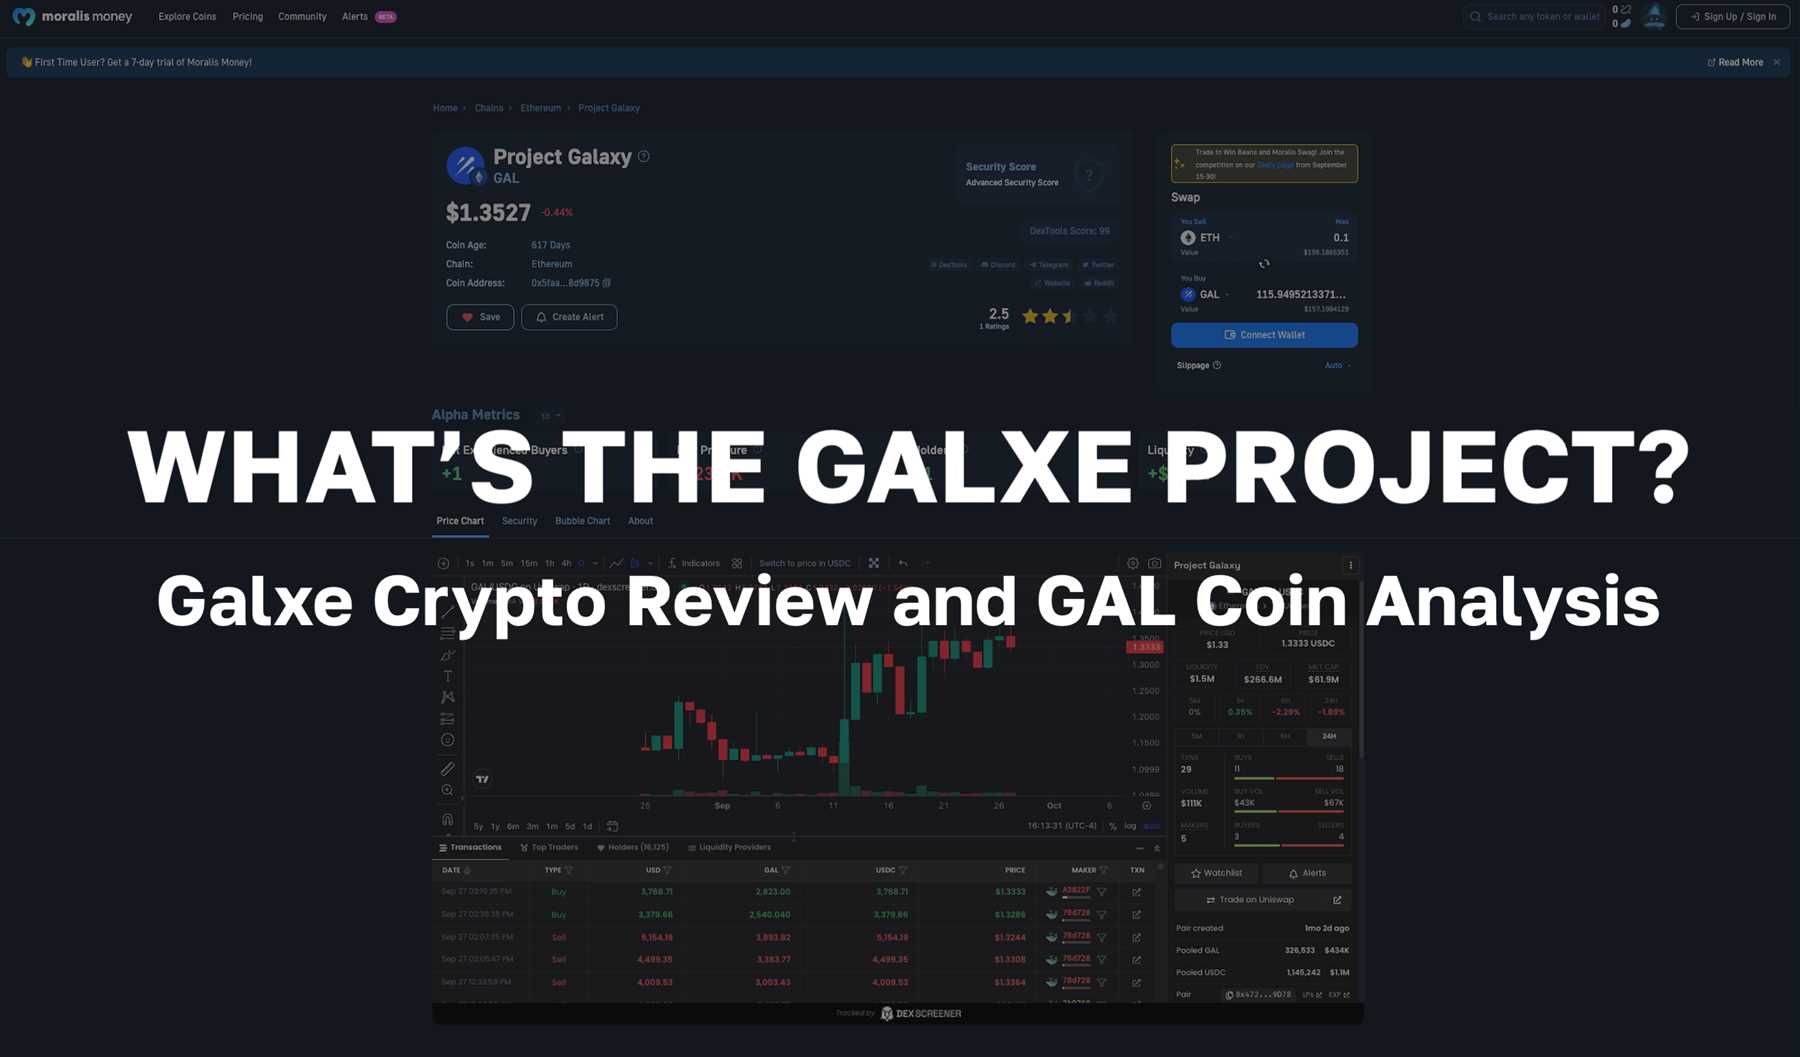 Why should you care about Dex Galxe (GAL)?